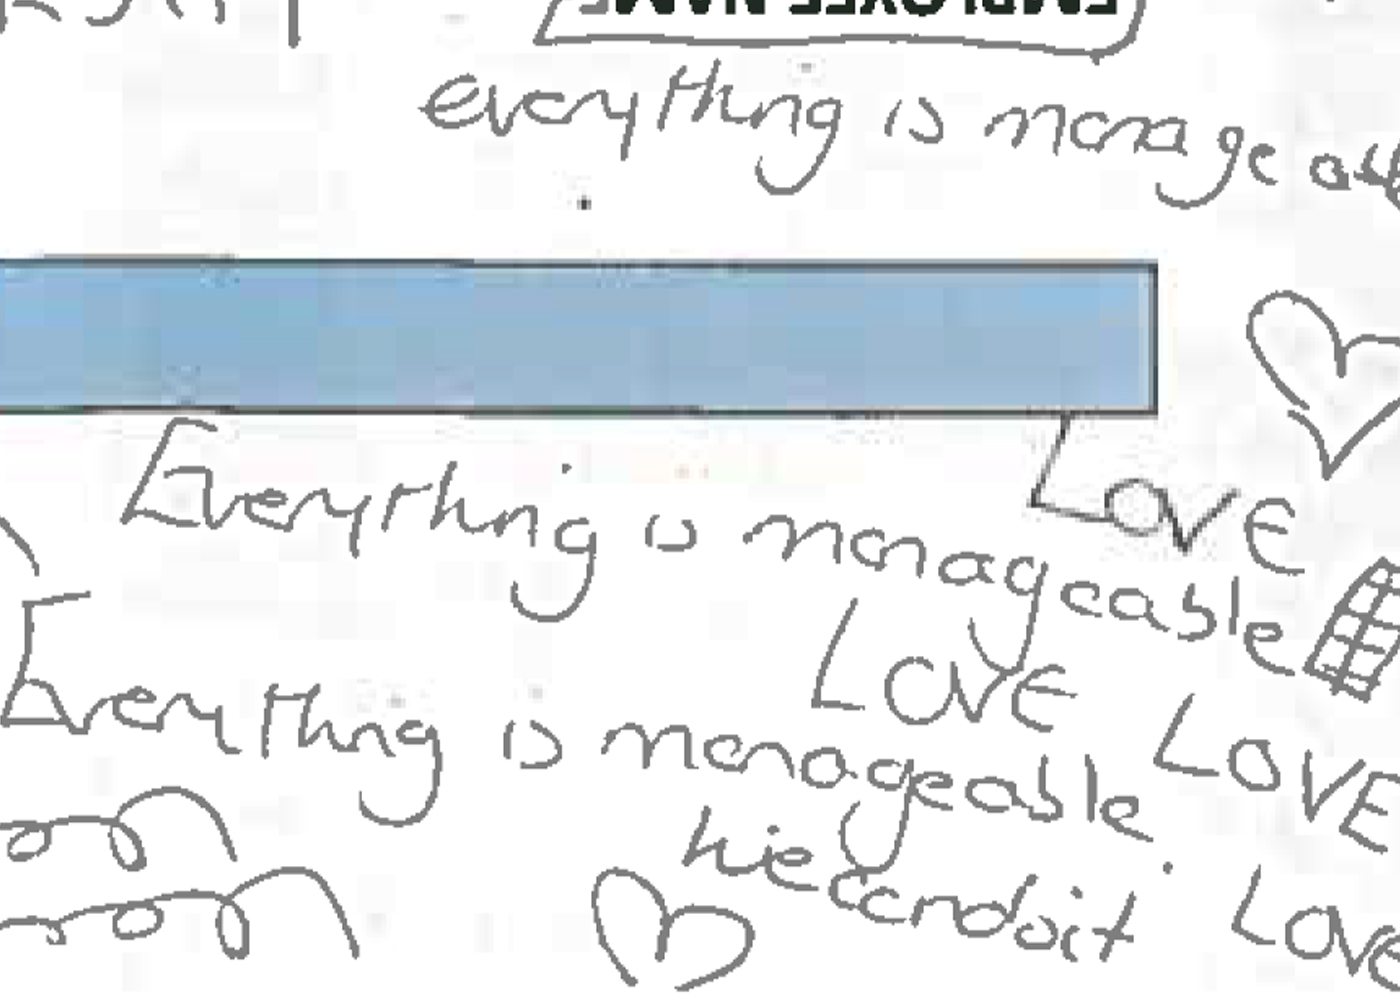 Handwritten messages uncovered at the time of Lucy Letbys arrest in July 2018. Image: Cheshire Constabulary.